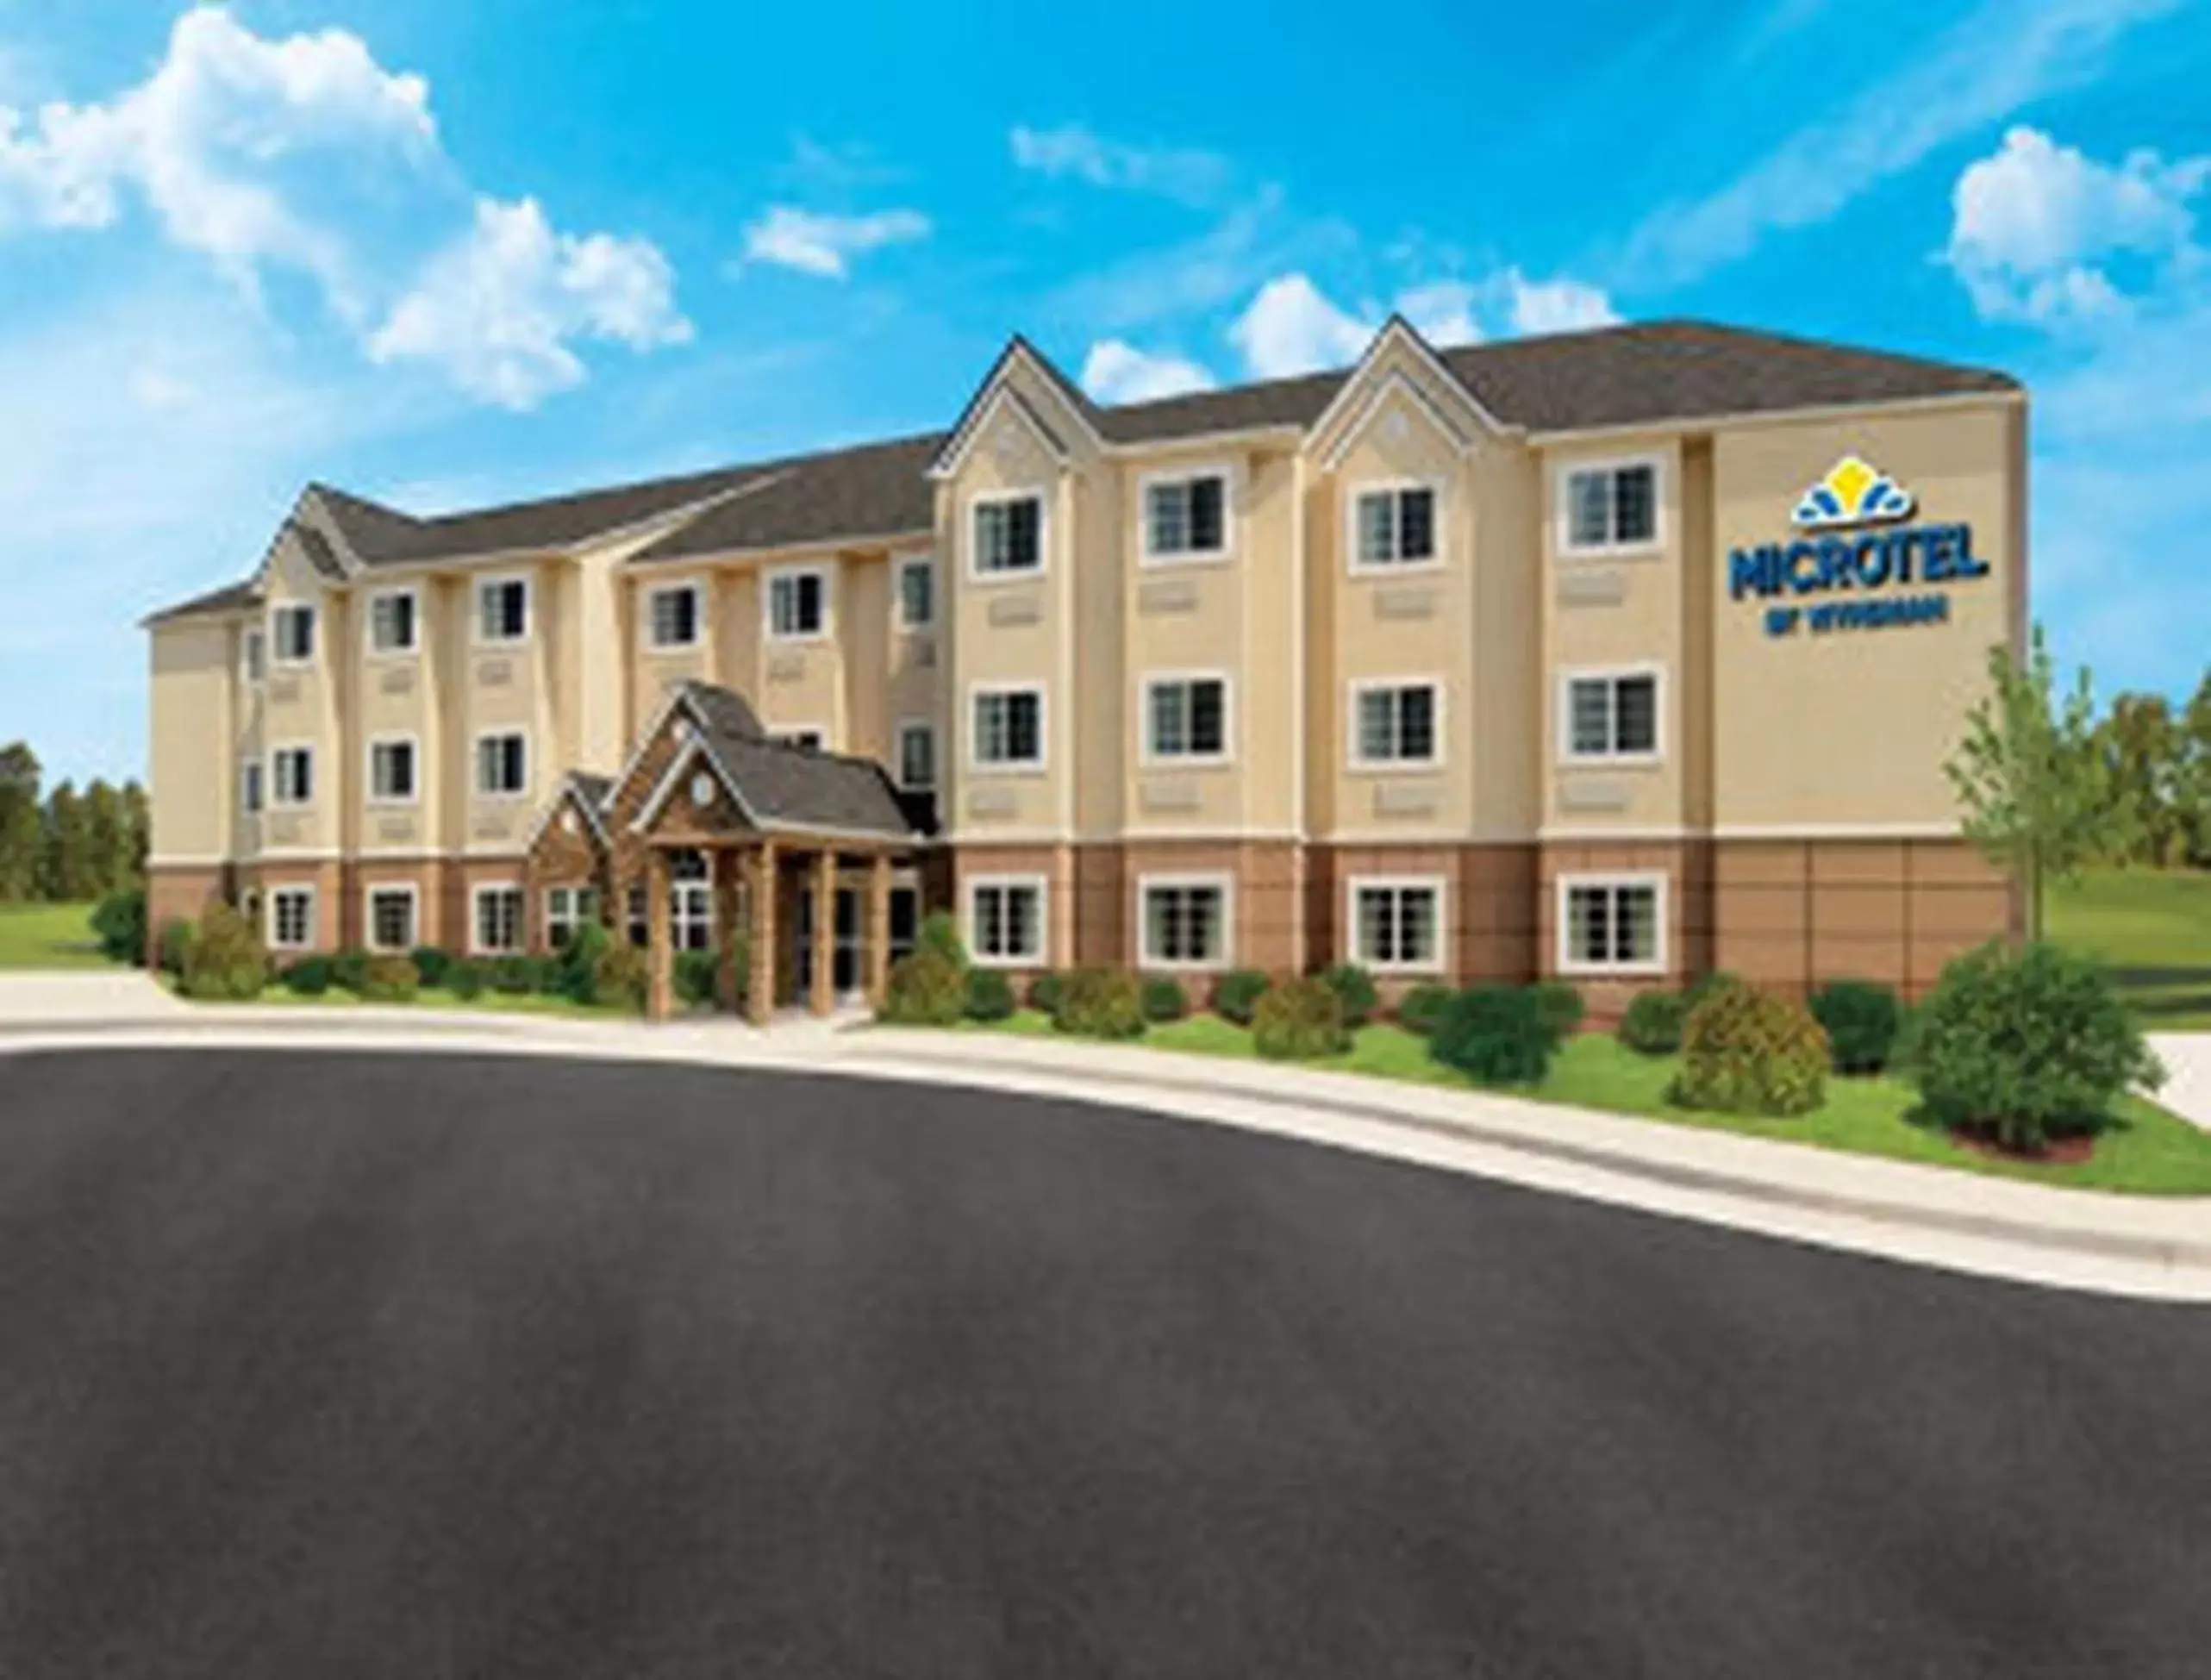 Facade/entrance, Property Building in Microtel Inn & Suites by Wyndham Altoona